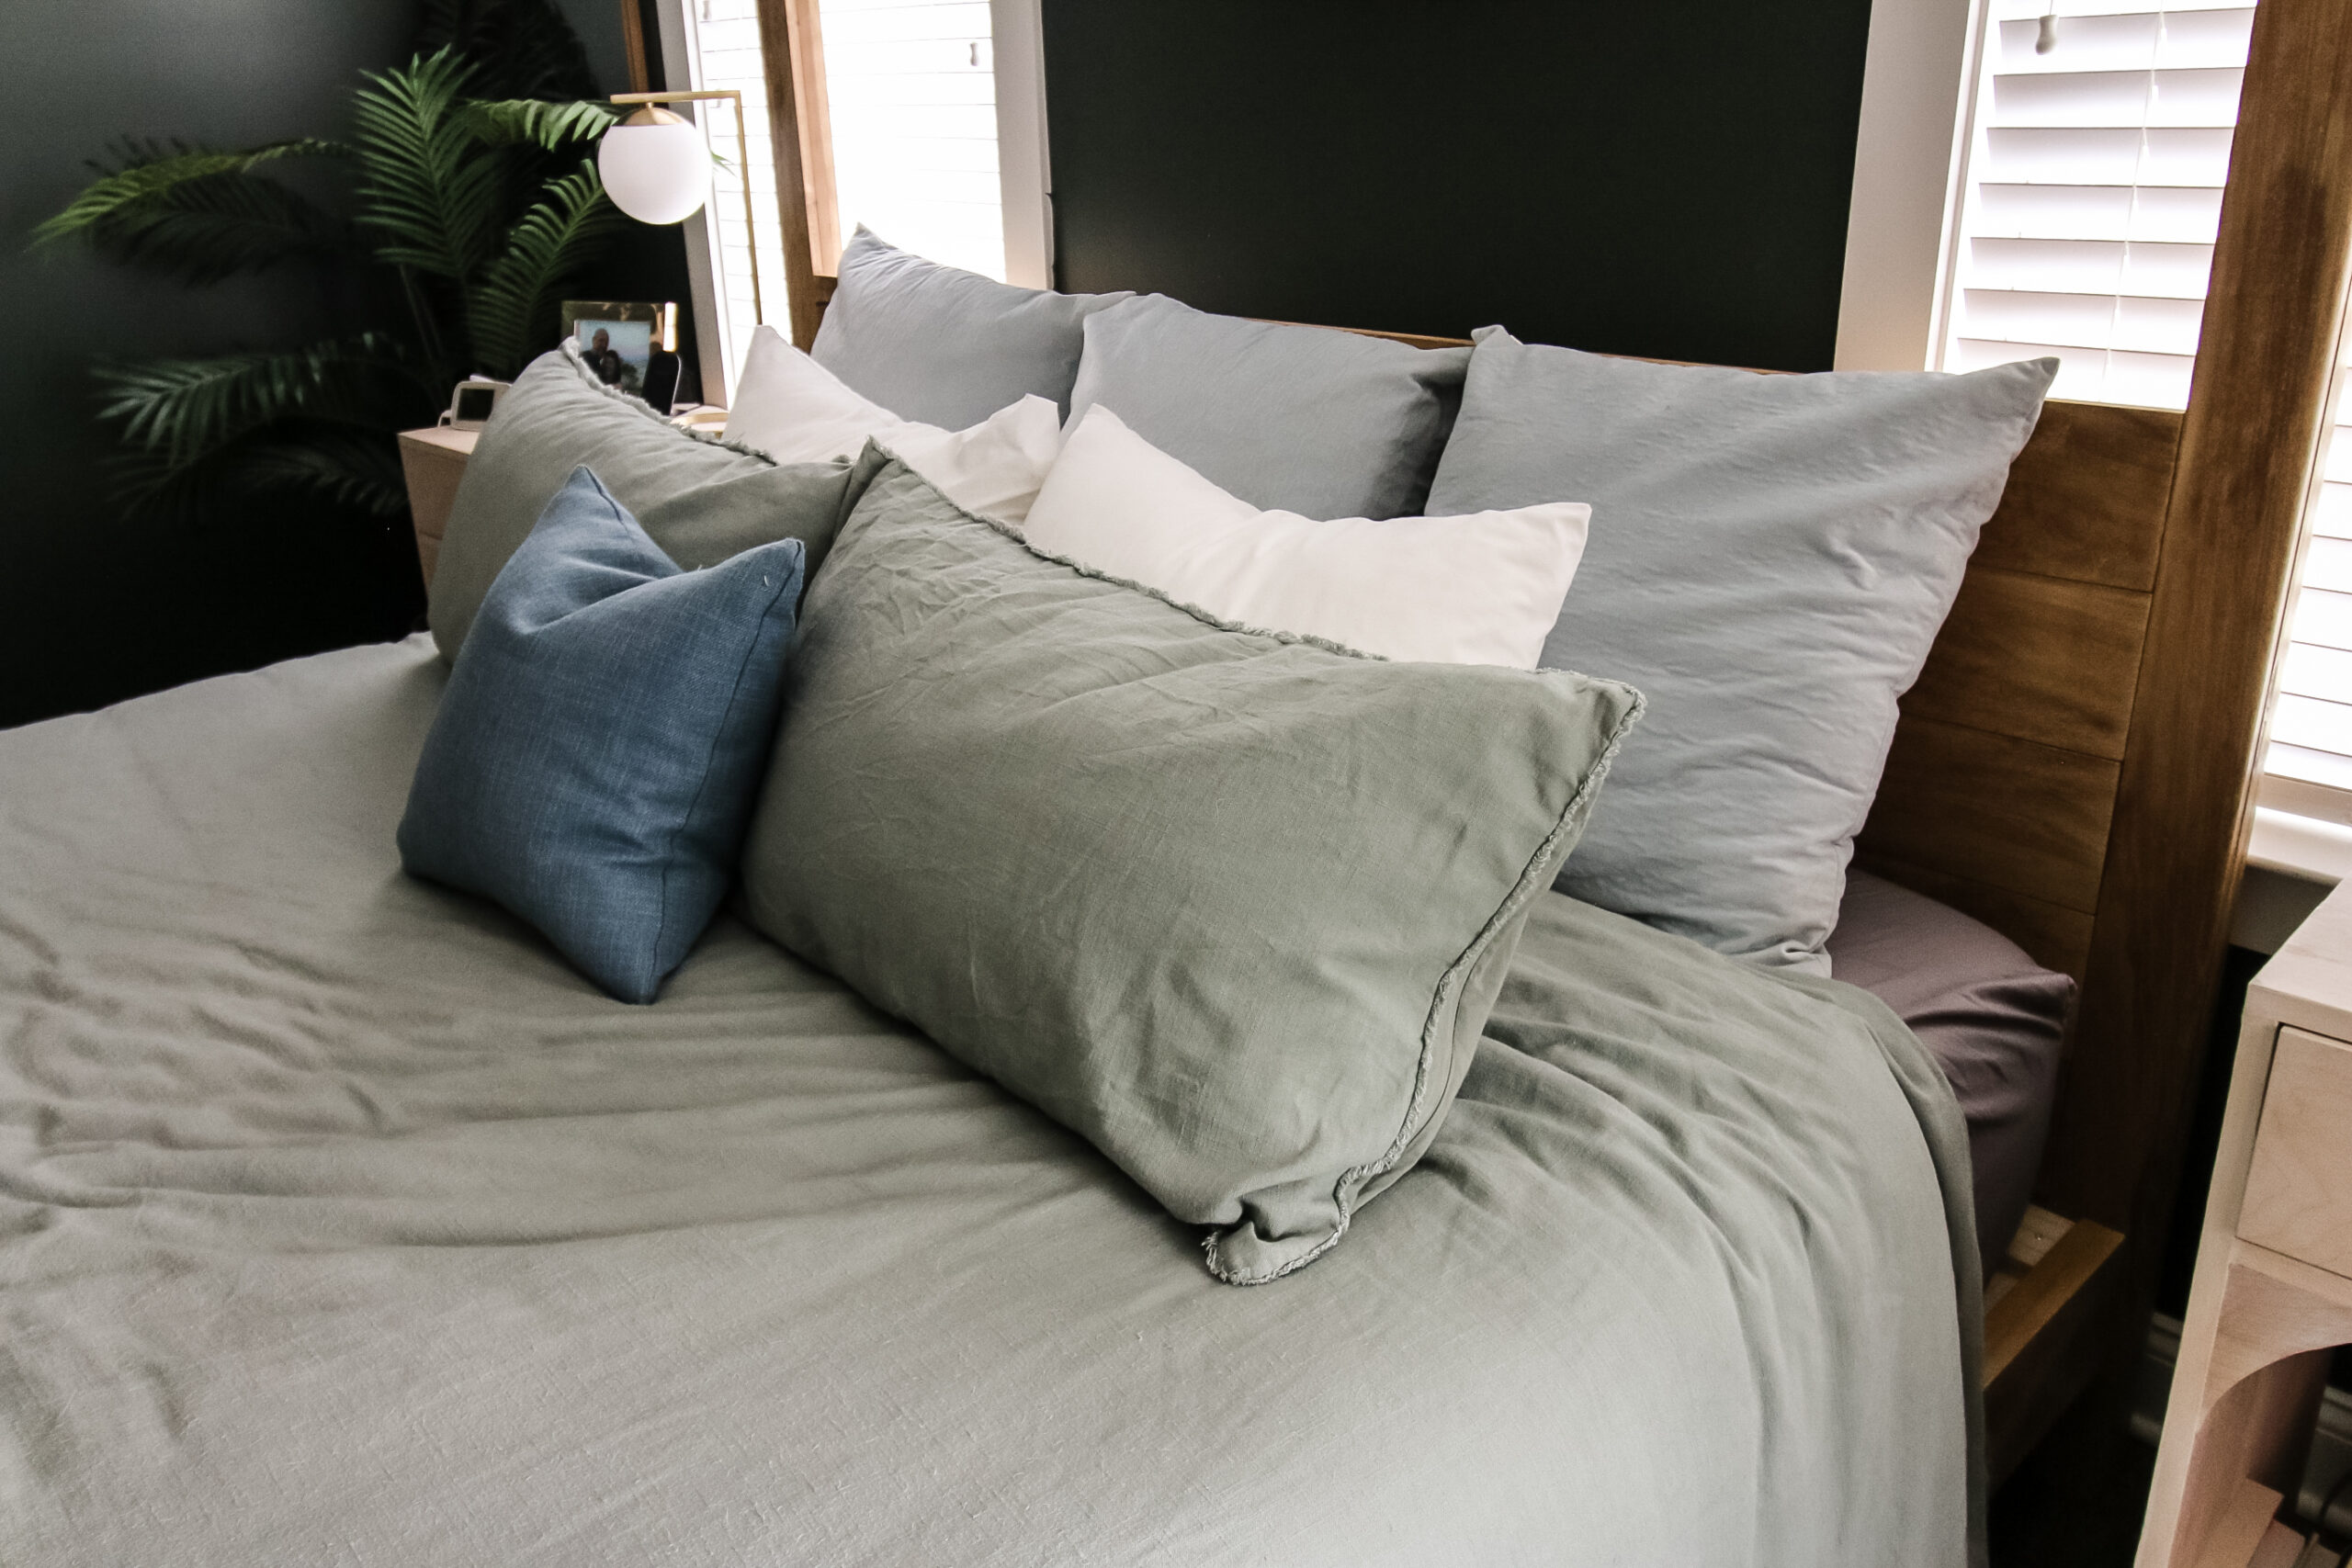 How to Arrange Throw Pillows on King Bed, All handmade home decor  including throw pillow covers